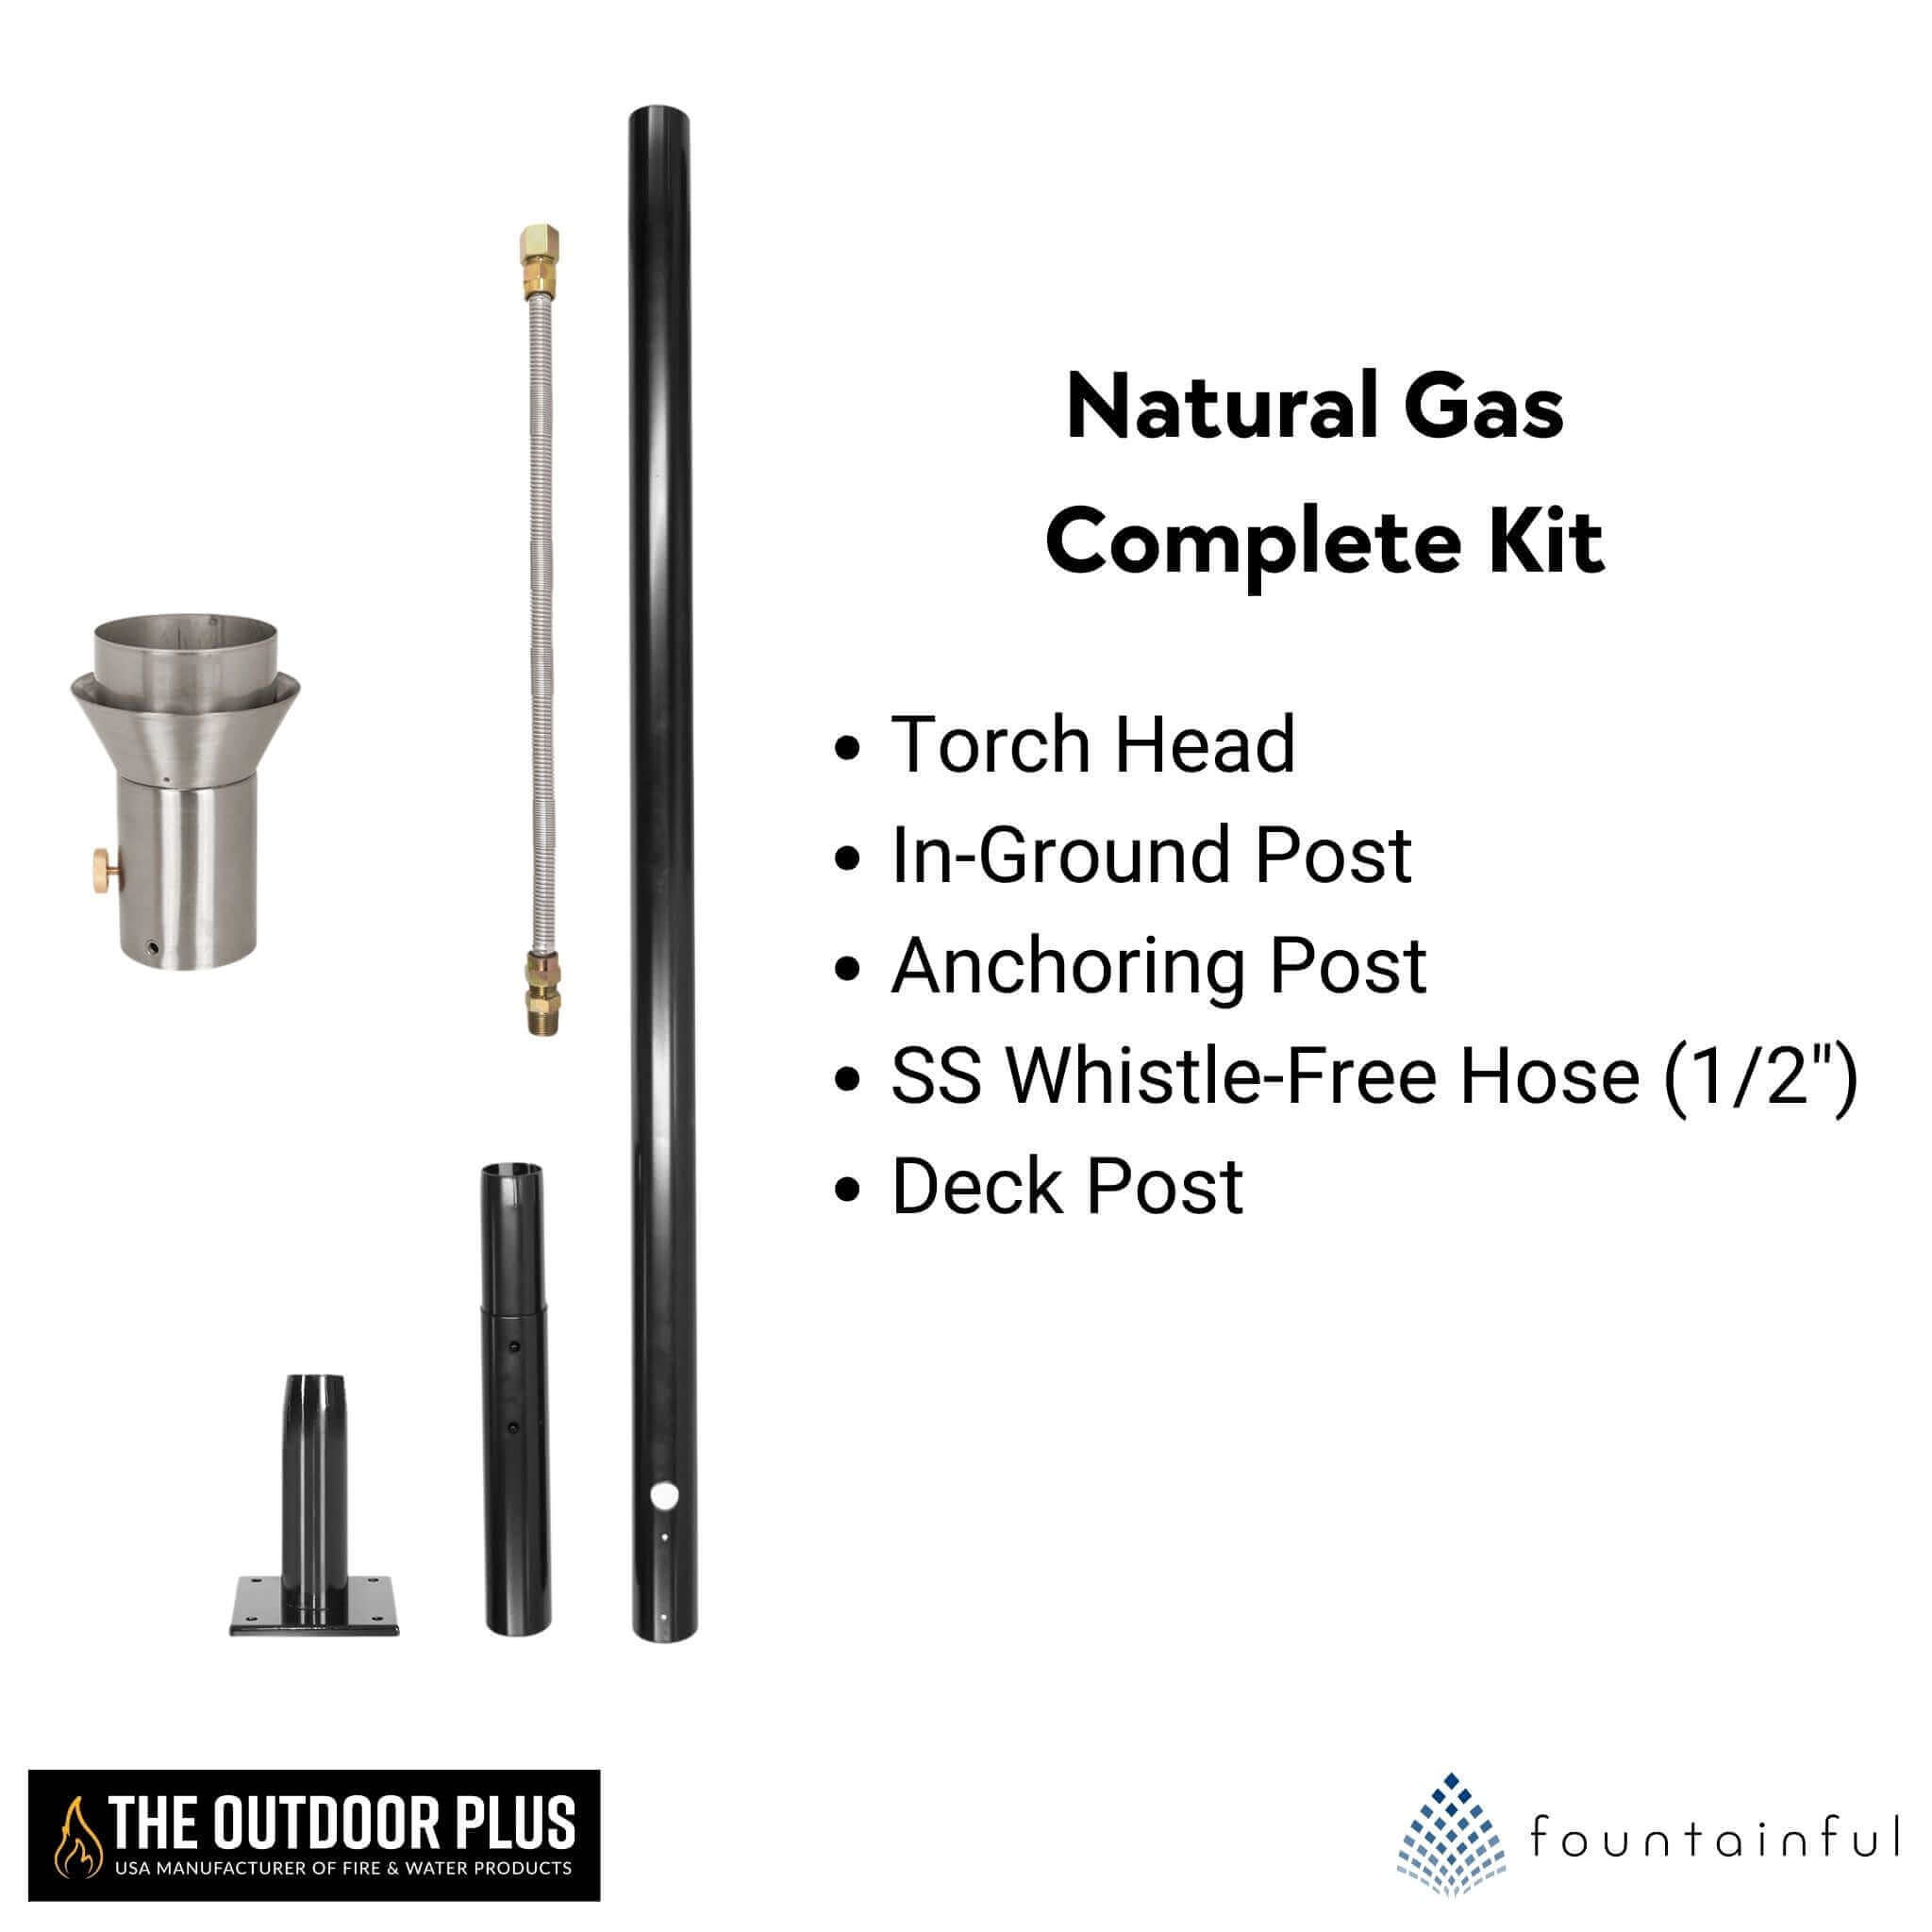 Hercules Fire Torch COMPLETE KIT - Stainless Steel - The Outdoor Plus